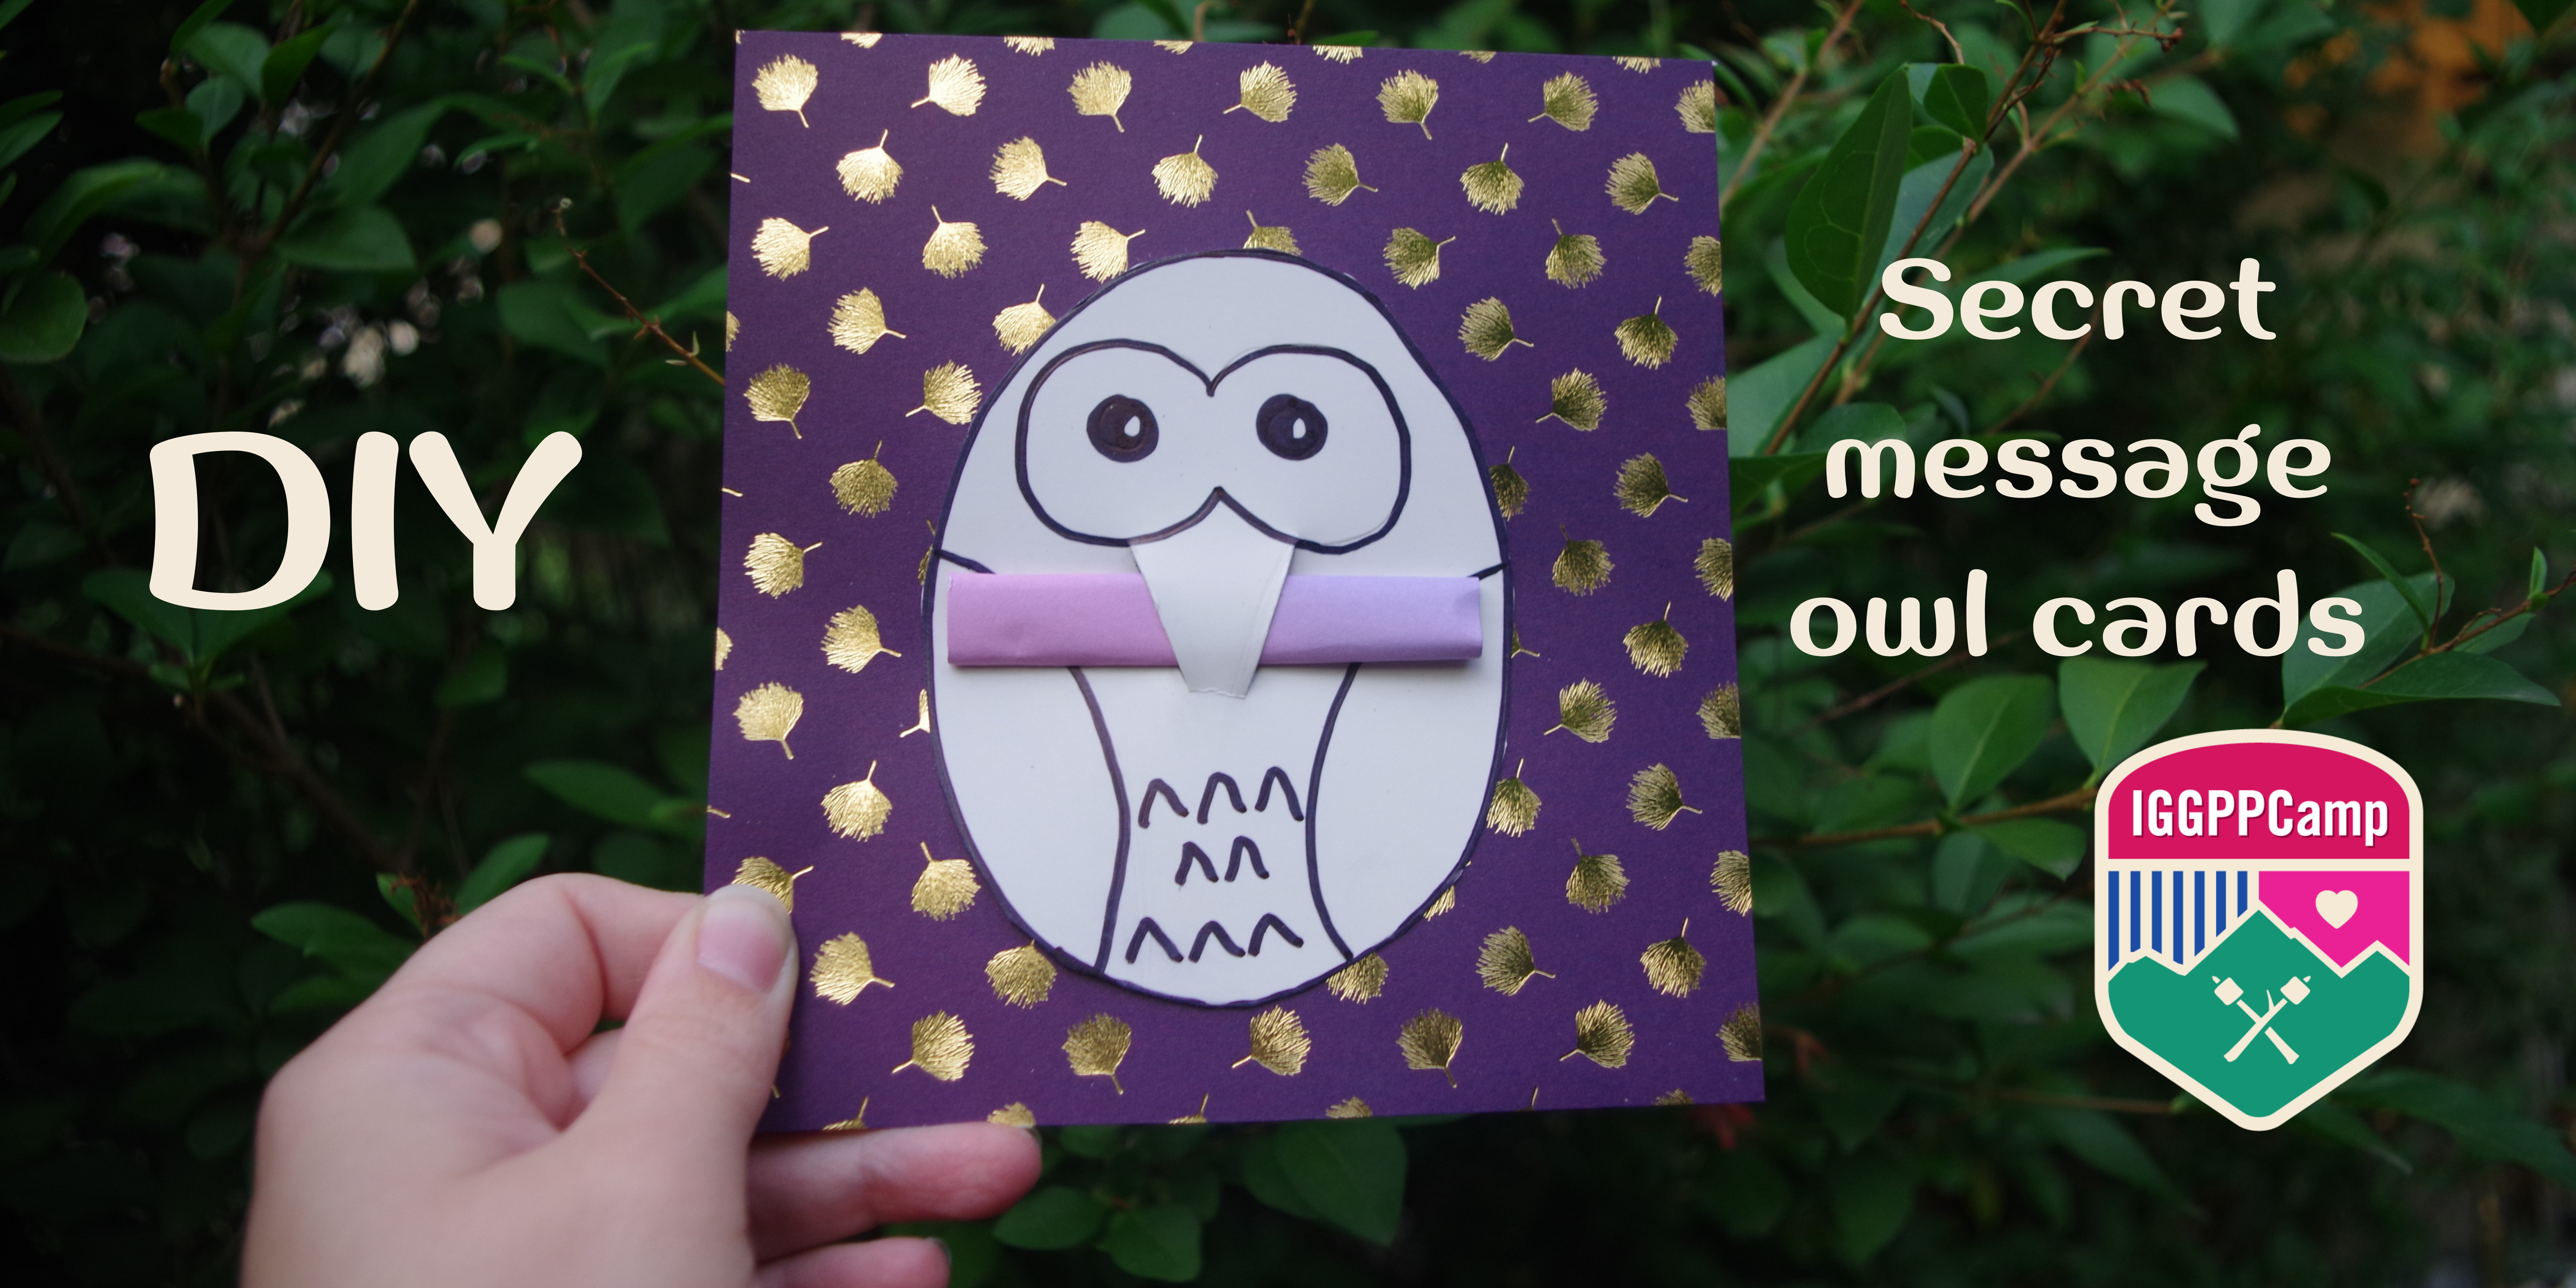 The completed secret owl message card! The owl is on dark purple card paper with a light purple note rolled up in its beak, all ready for sending to a friend!